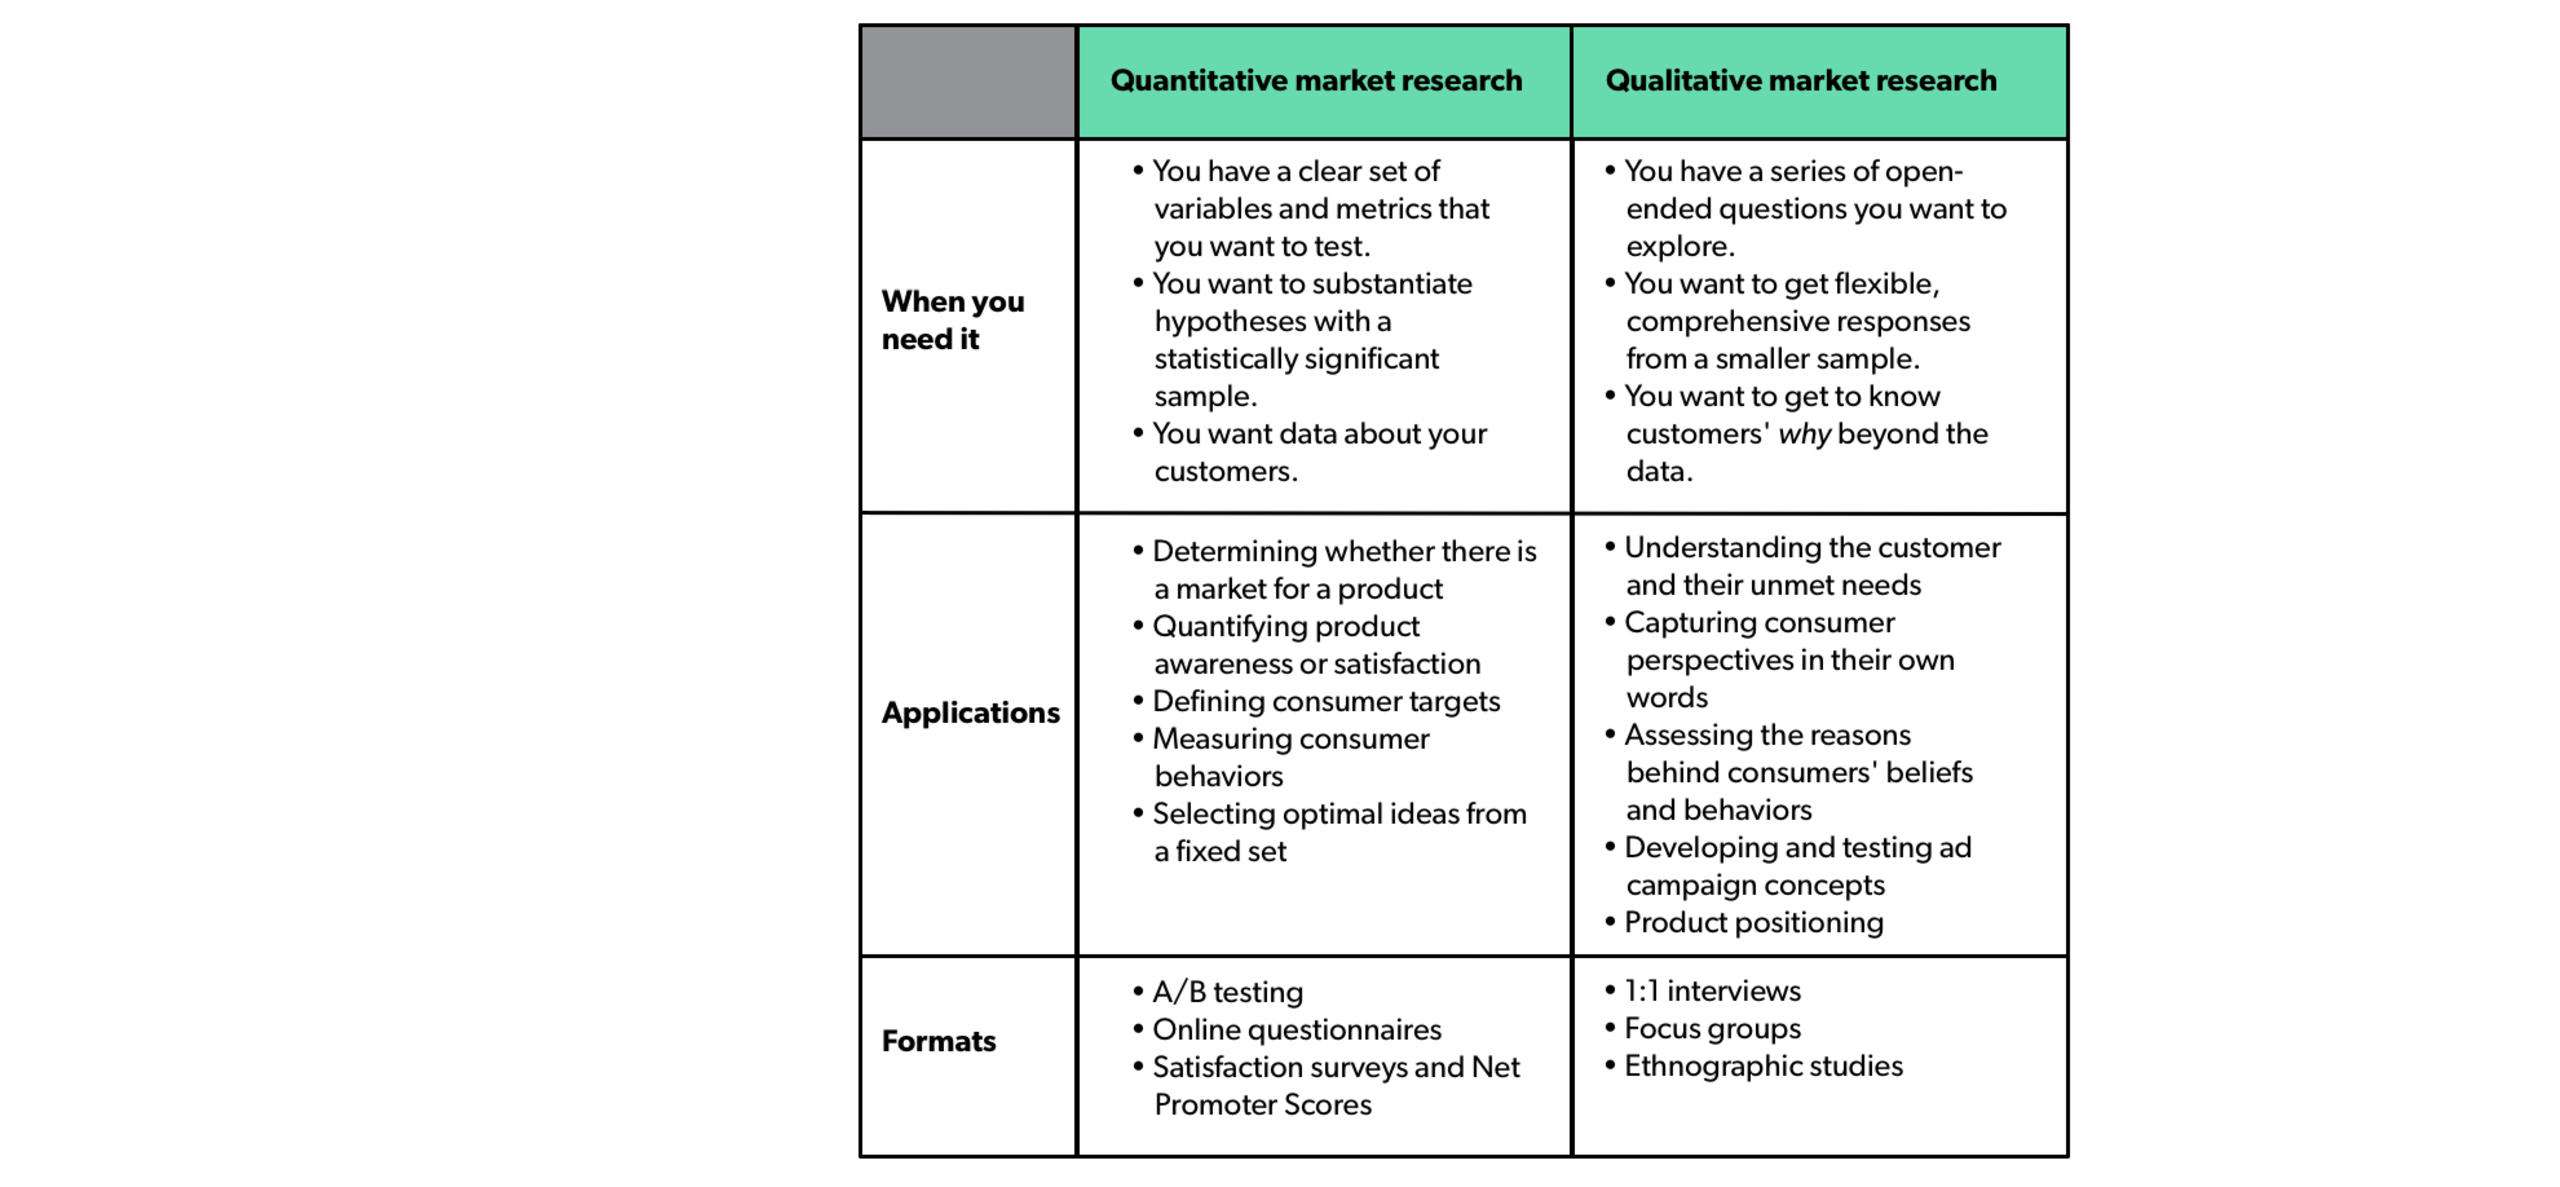 Why Qualitative Market Research matters, How to Wield it Effectively